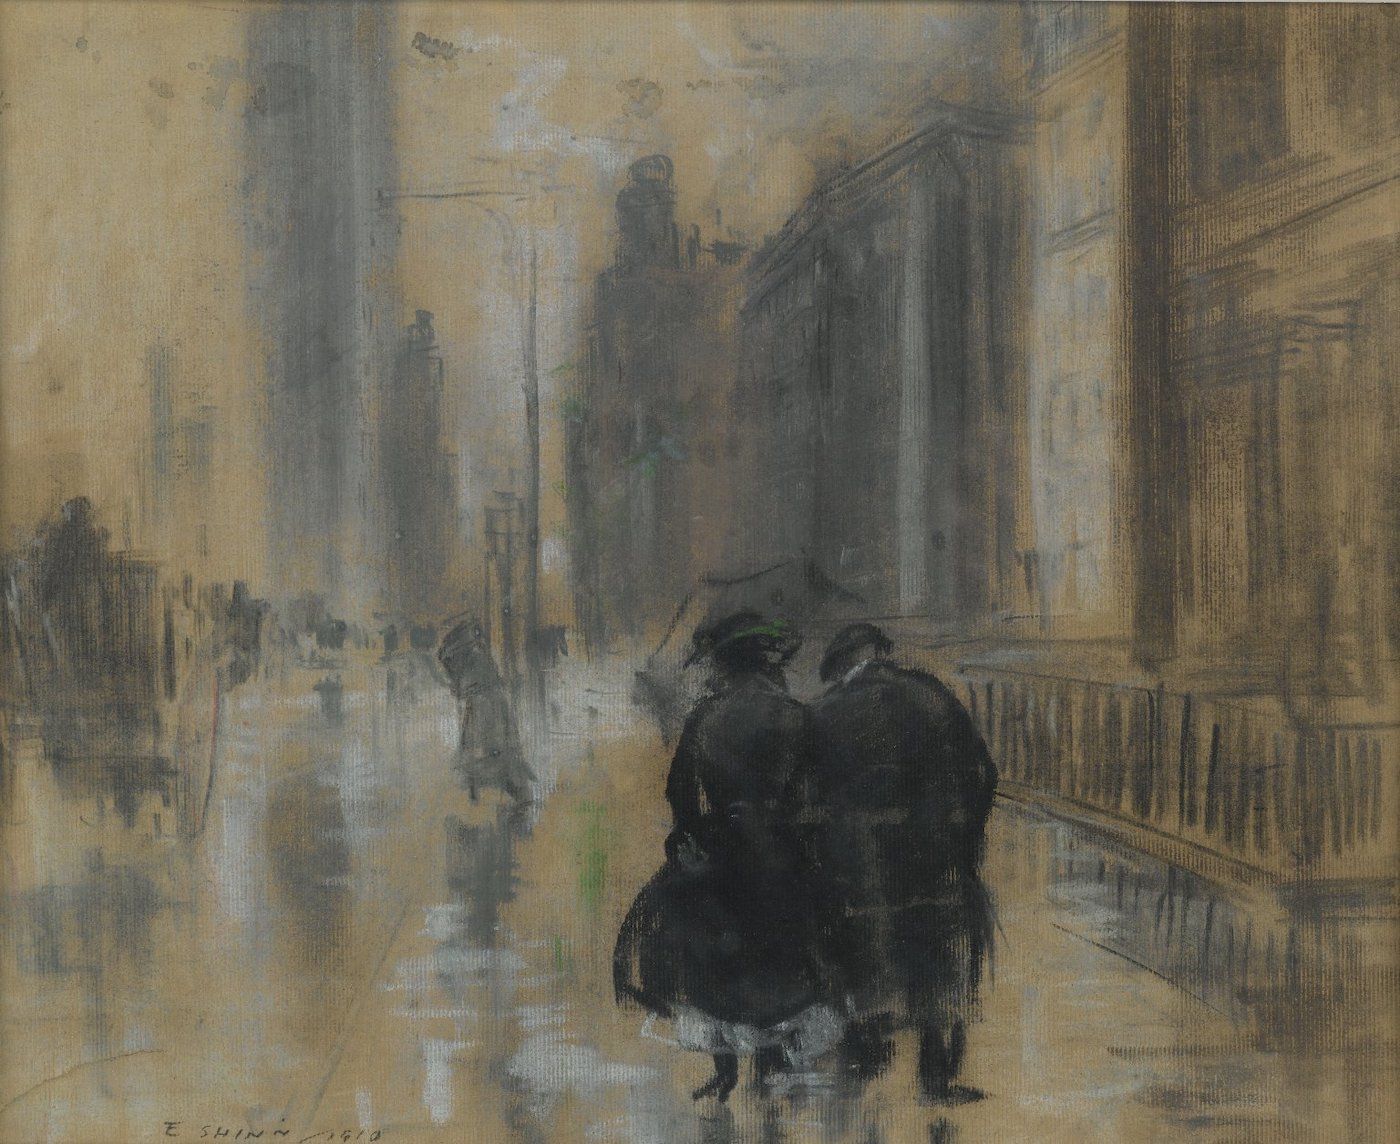 A boldly sketched couple stand out in the forefront of a wet, windy city scene.